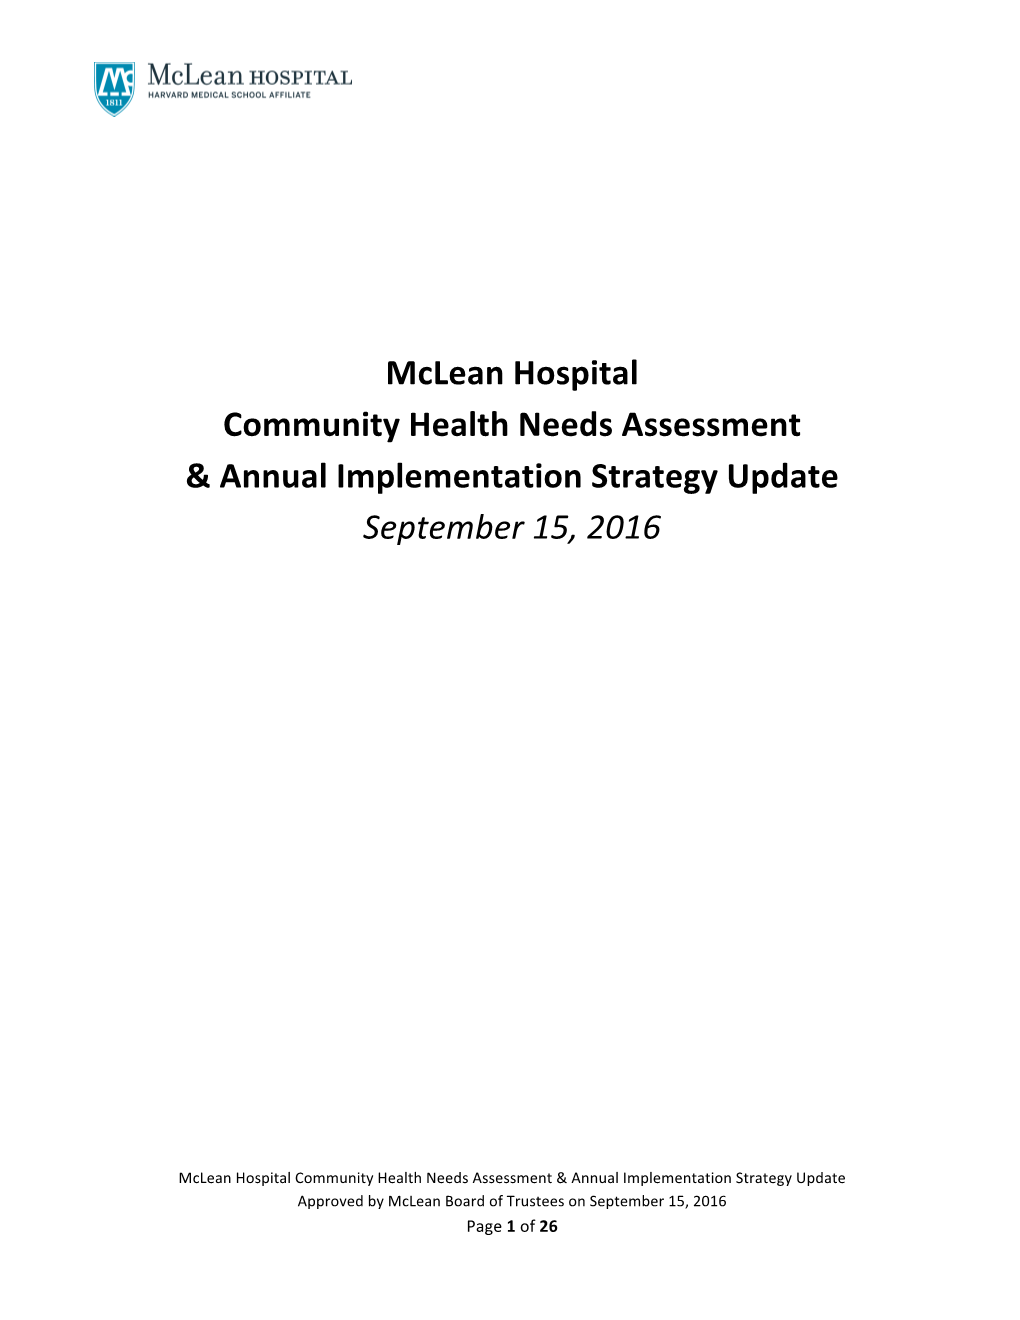 Mclean Hospital Community Health Needs Assessment & Annual